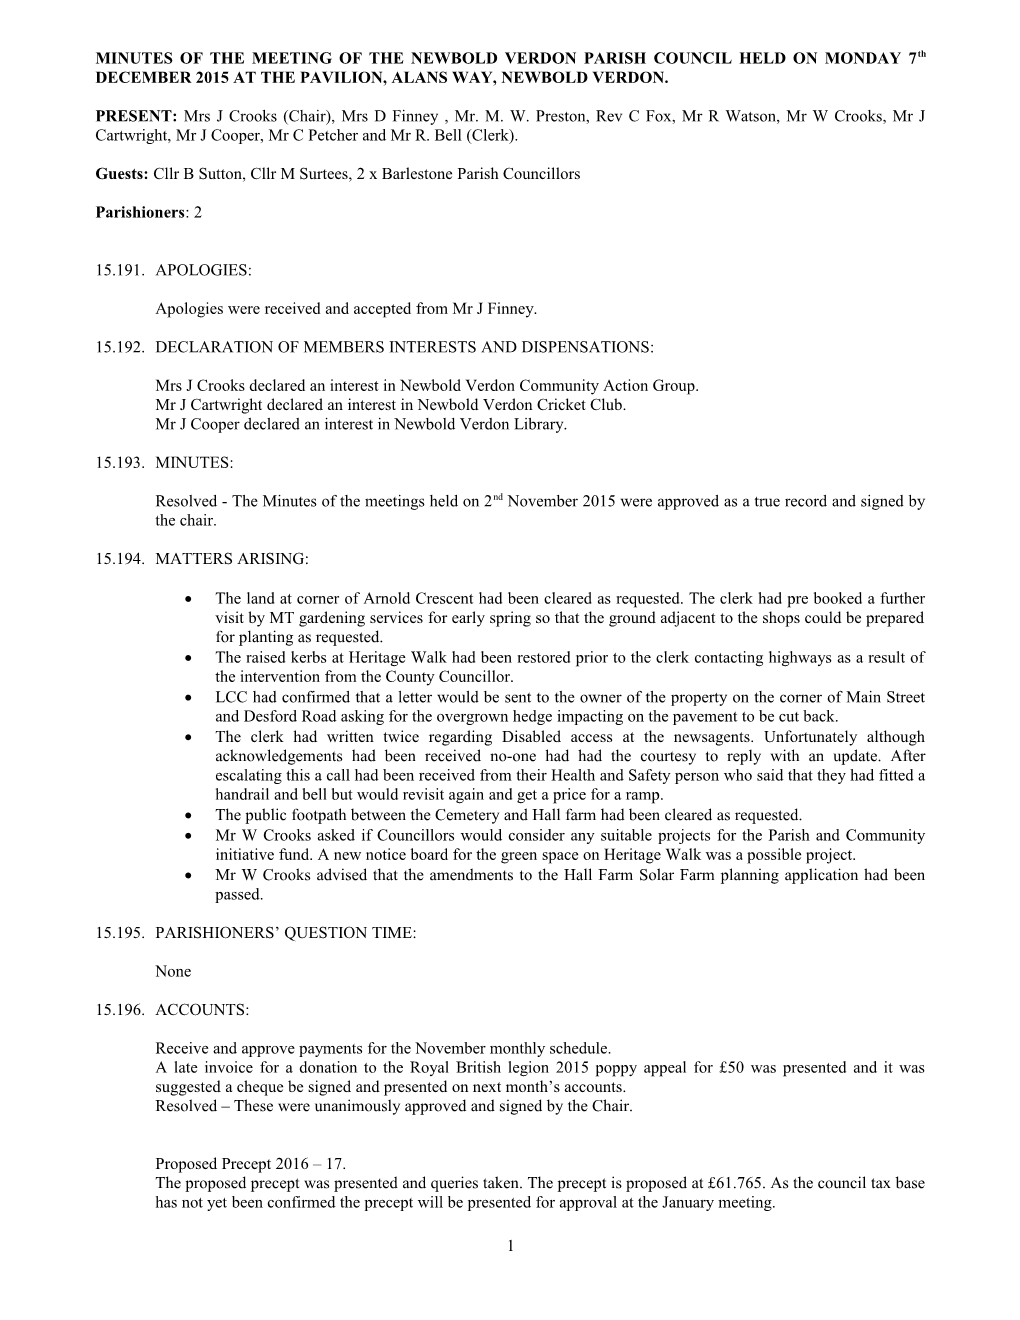 Minutes of the Meeting of the Newbold Verdon Parish Council Held on Monday 7 June 1999 s3